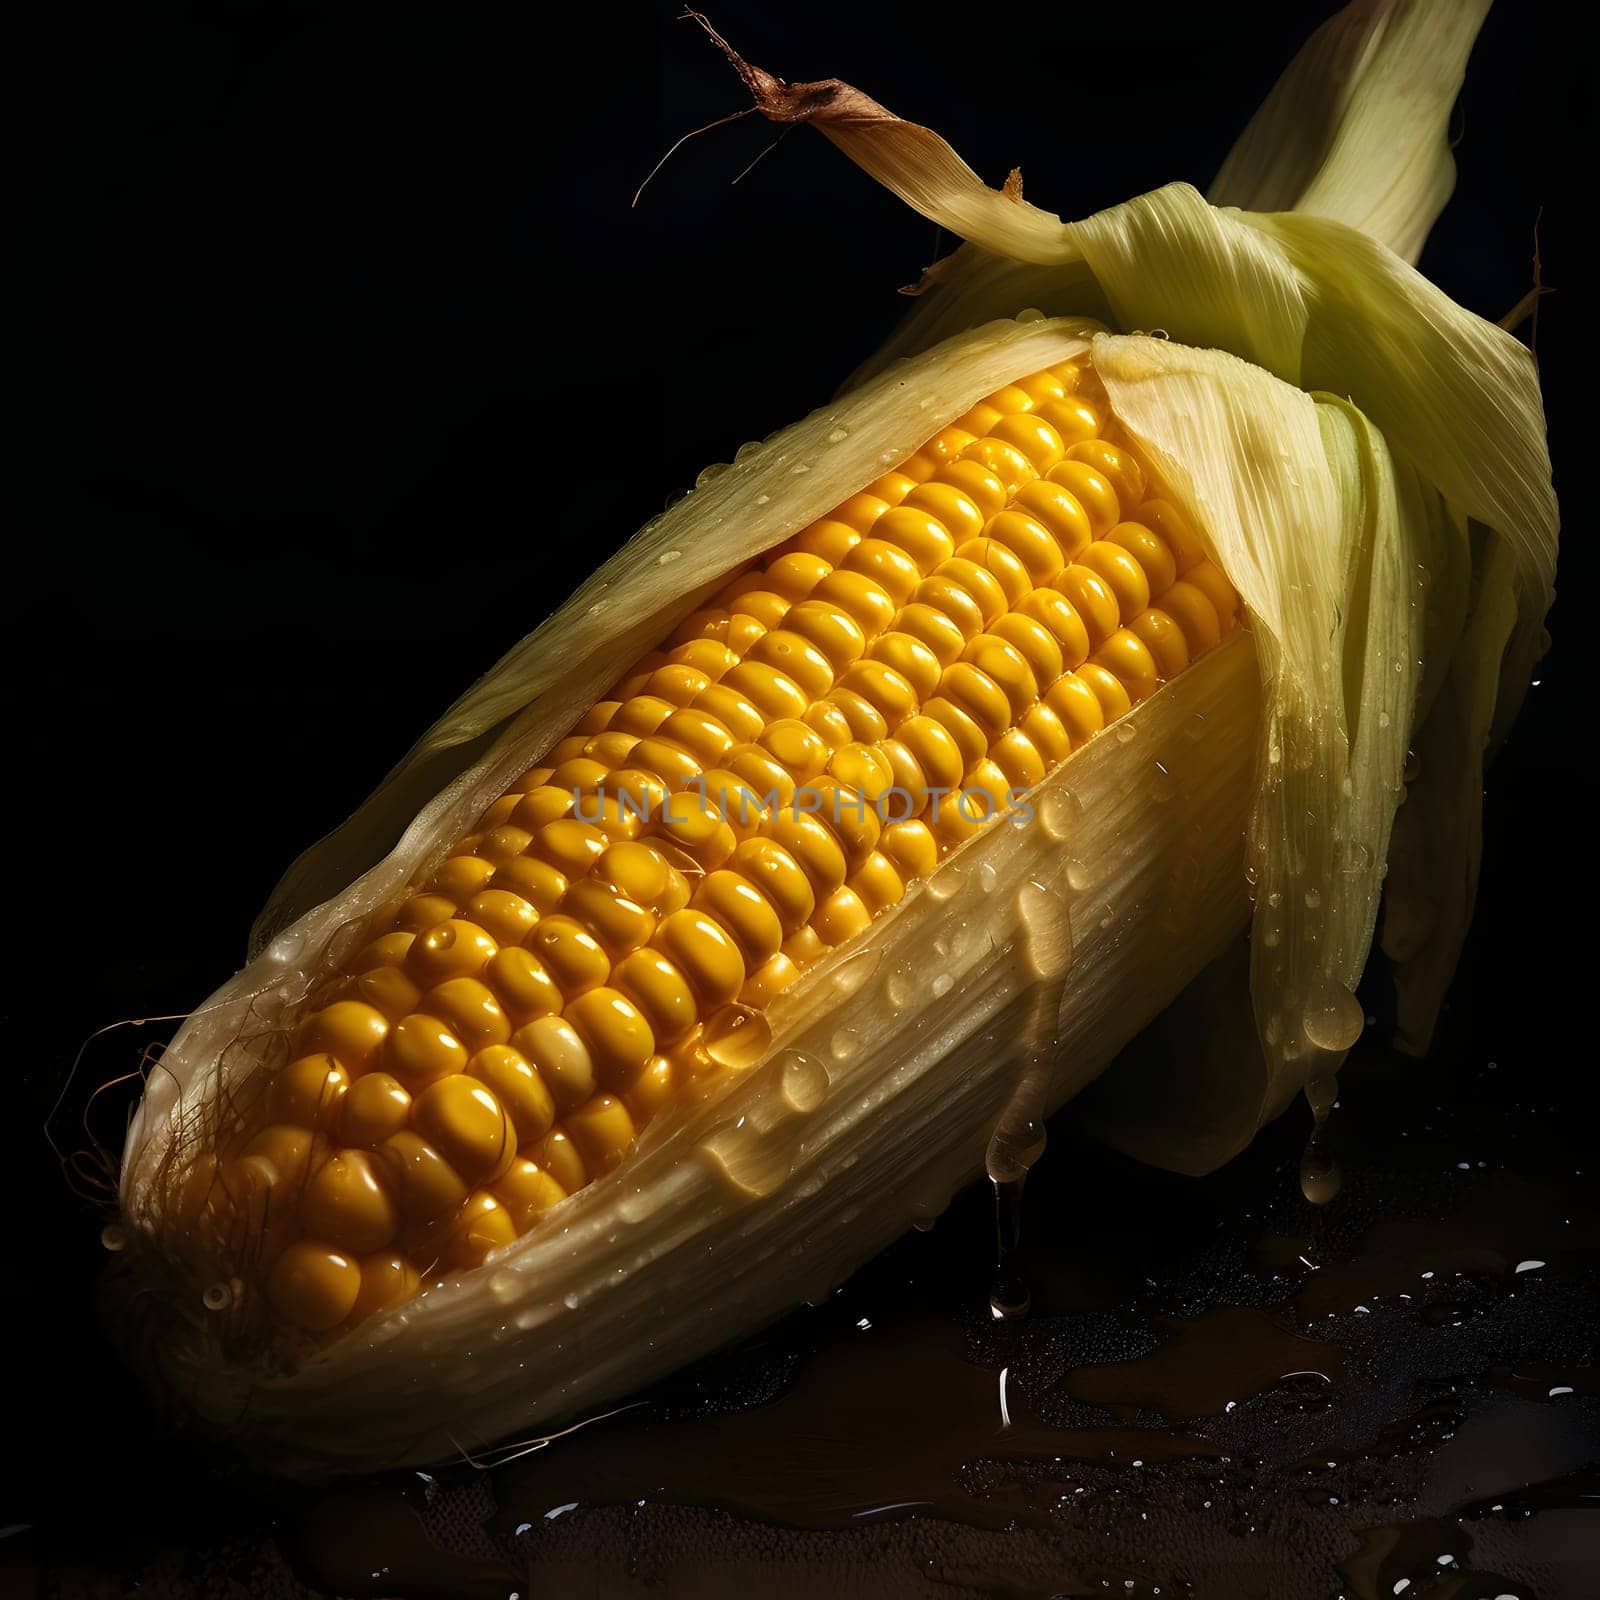 Yellow Corn Cob in Green Leaf, Dripping drops of water, dark background. Corn as a dish of thanksgiving for the harvest. An atmosphere of joy and celebration.